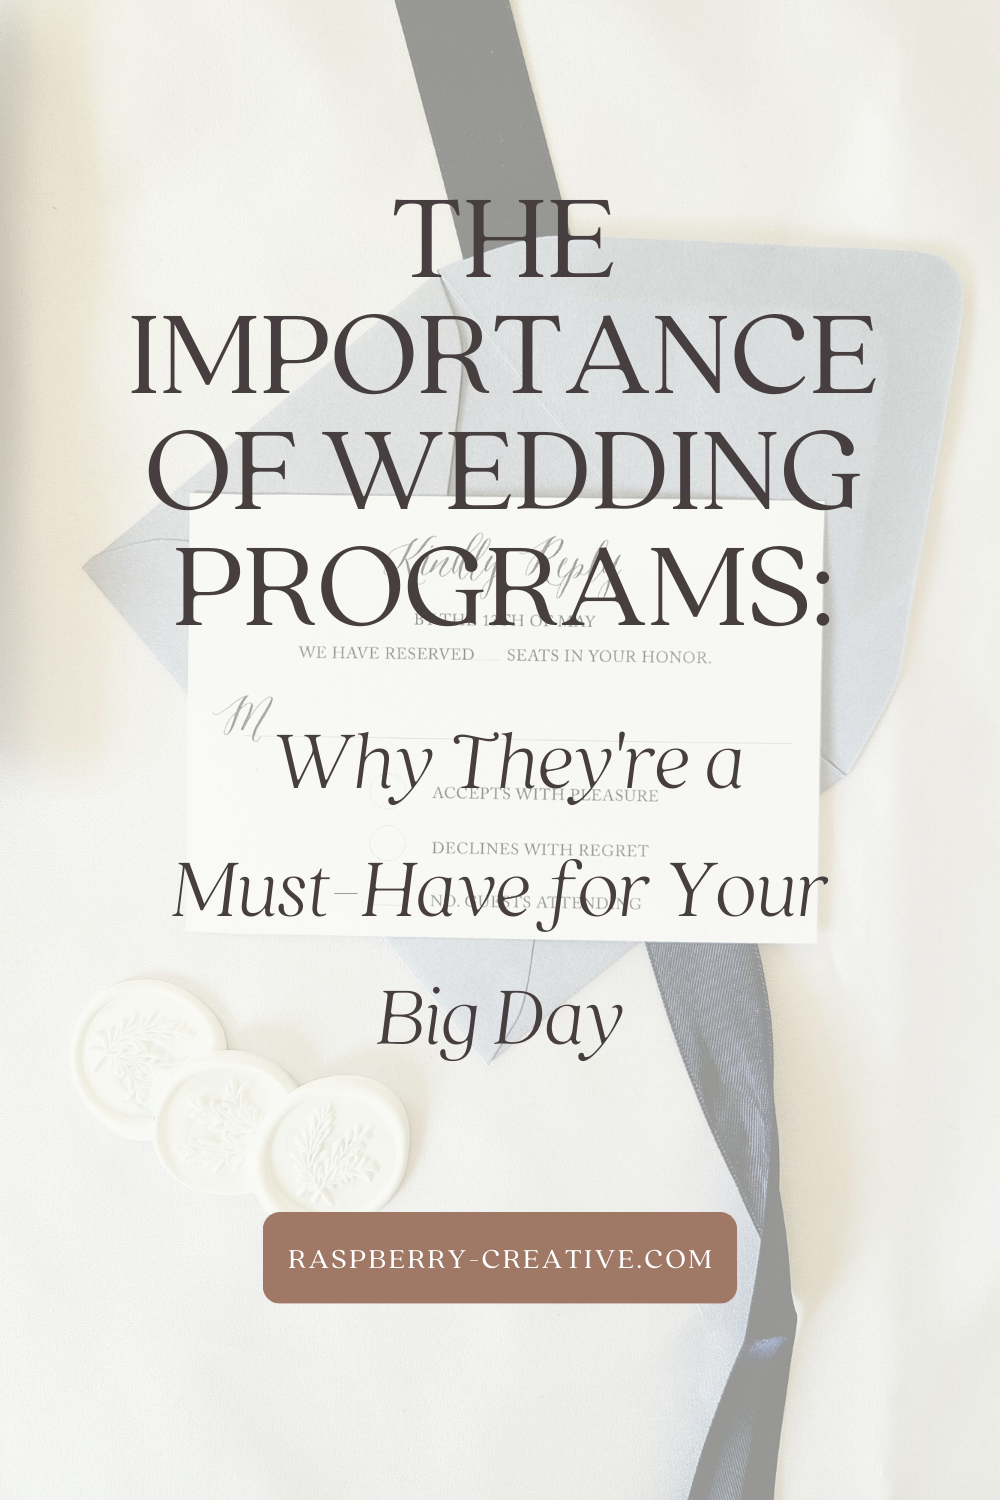 the-importance-of-wedding-programs-why-they-are-a-must-have-for-your-big-day-02